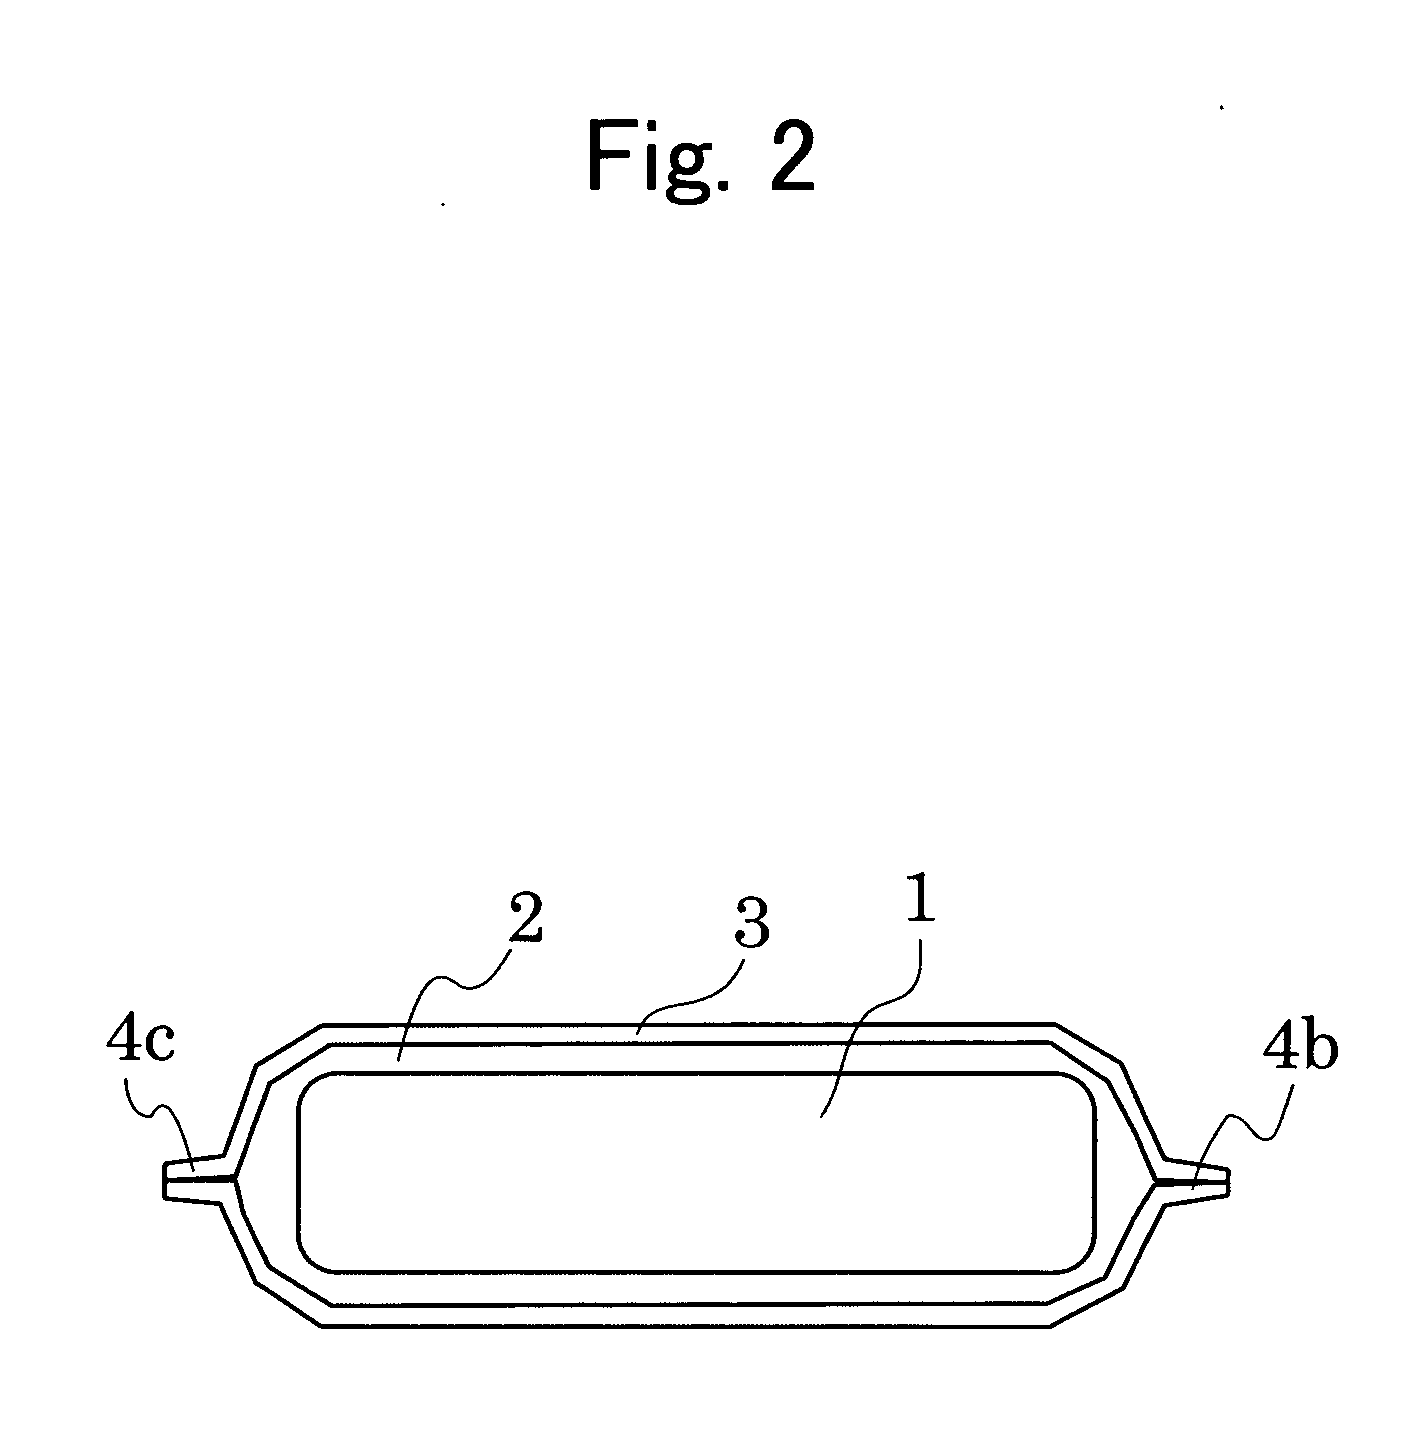 Sealed cell using film outer casing body